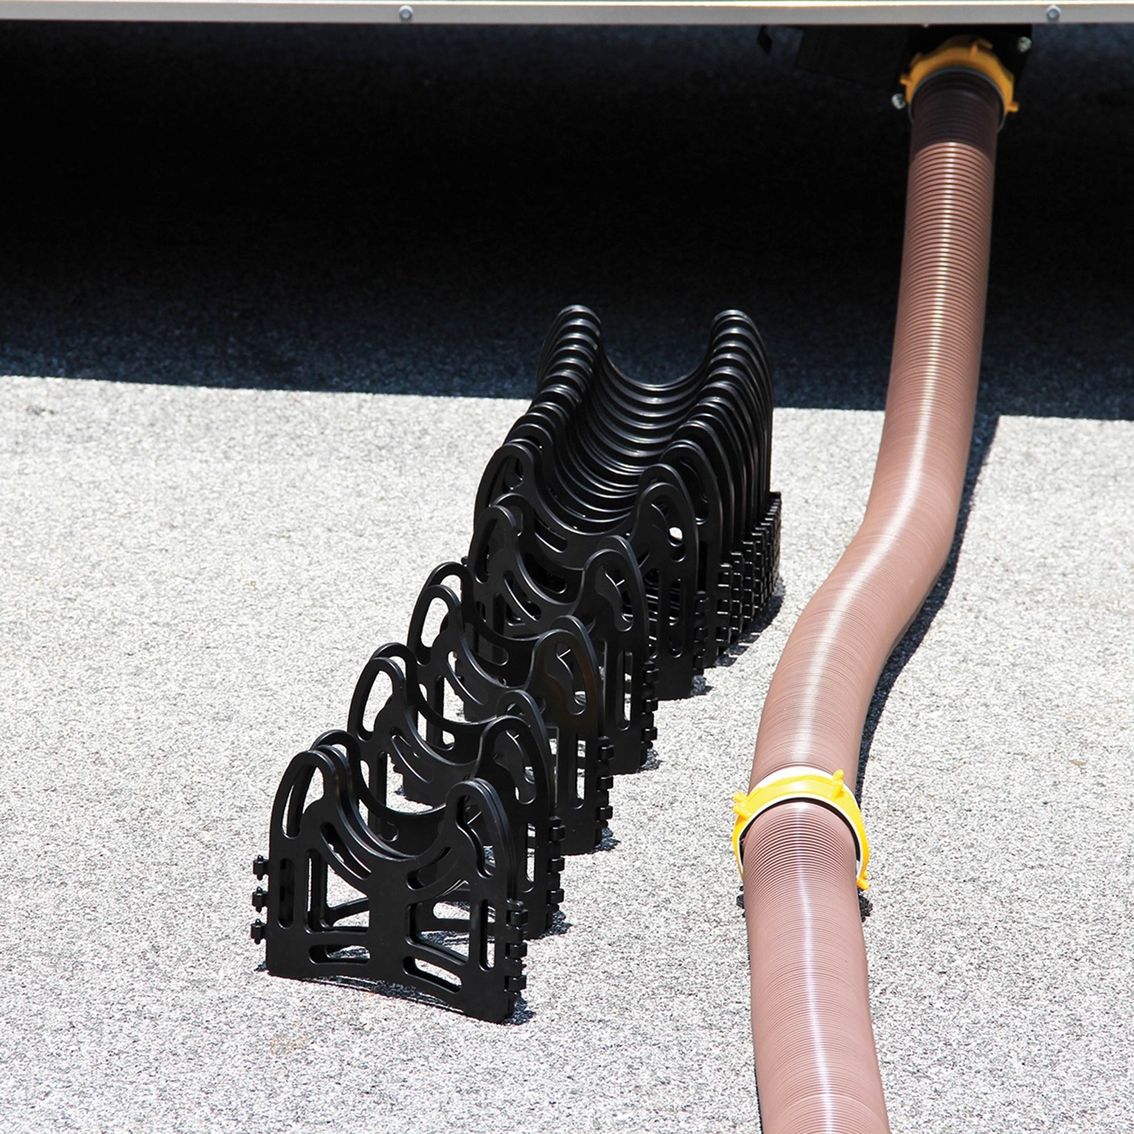 Camco Sidewinder 15 ft. Plastic Sewer Hose Support - Image 5 of 8